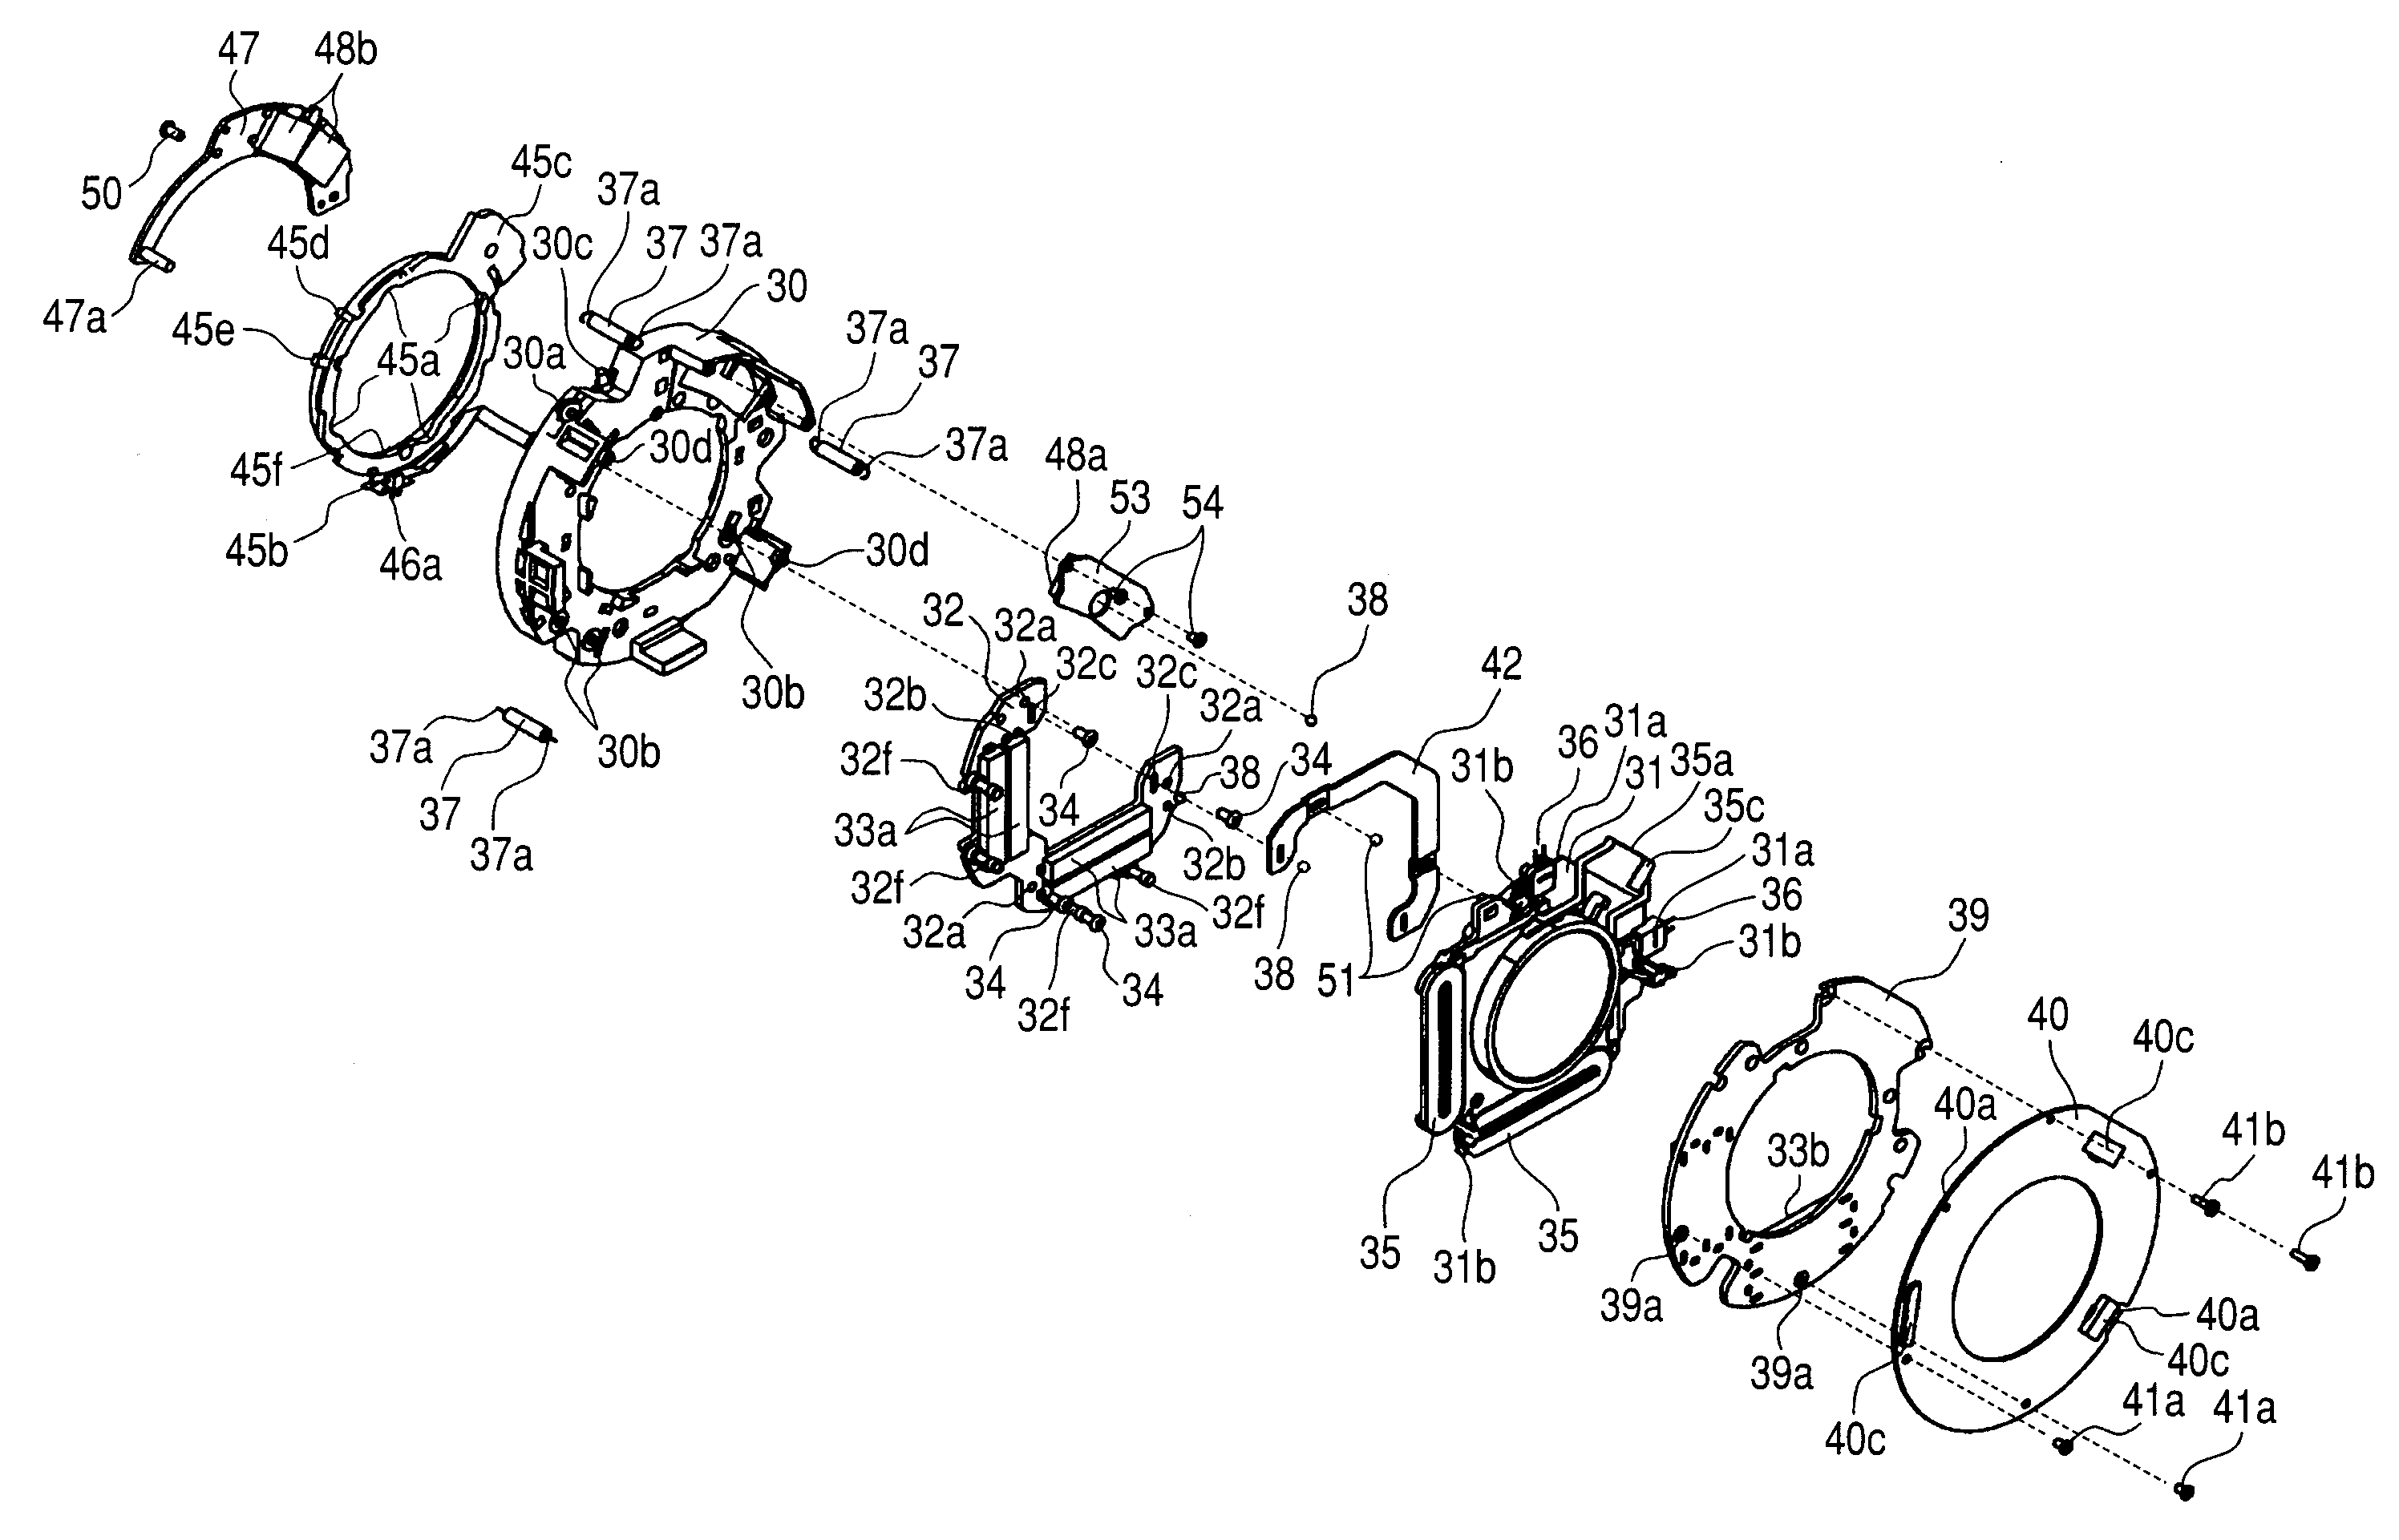 Optical apparatus including an image stabilizing apparatus